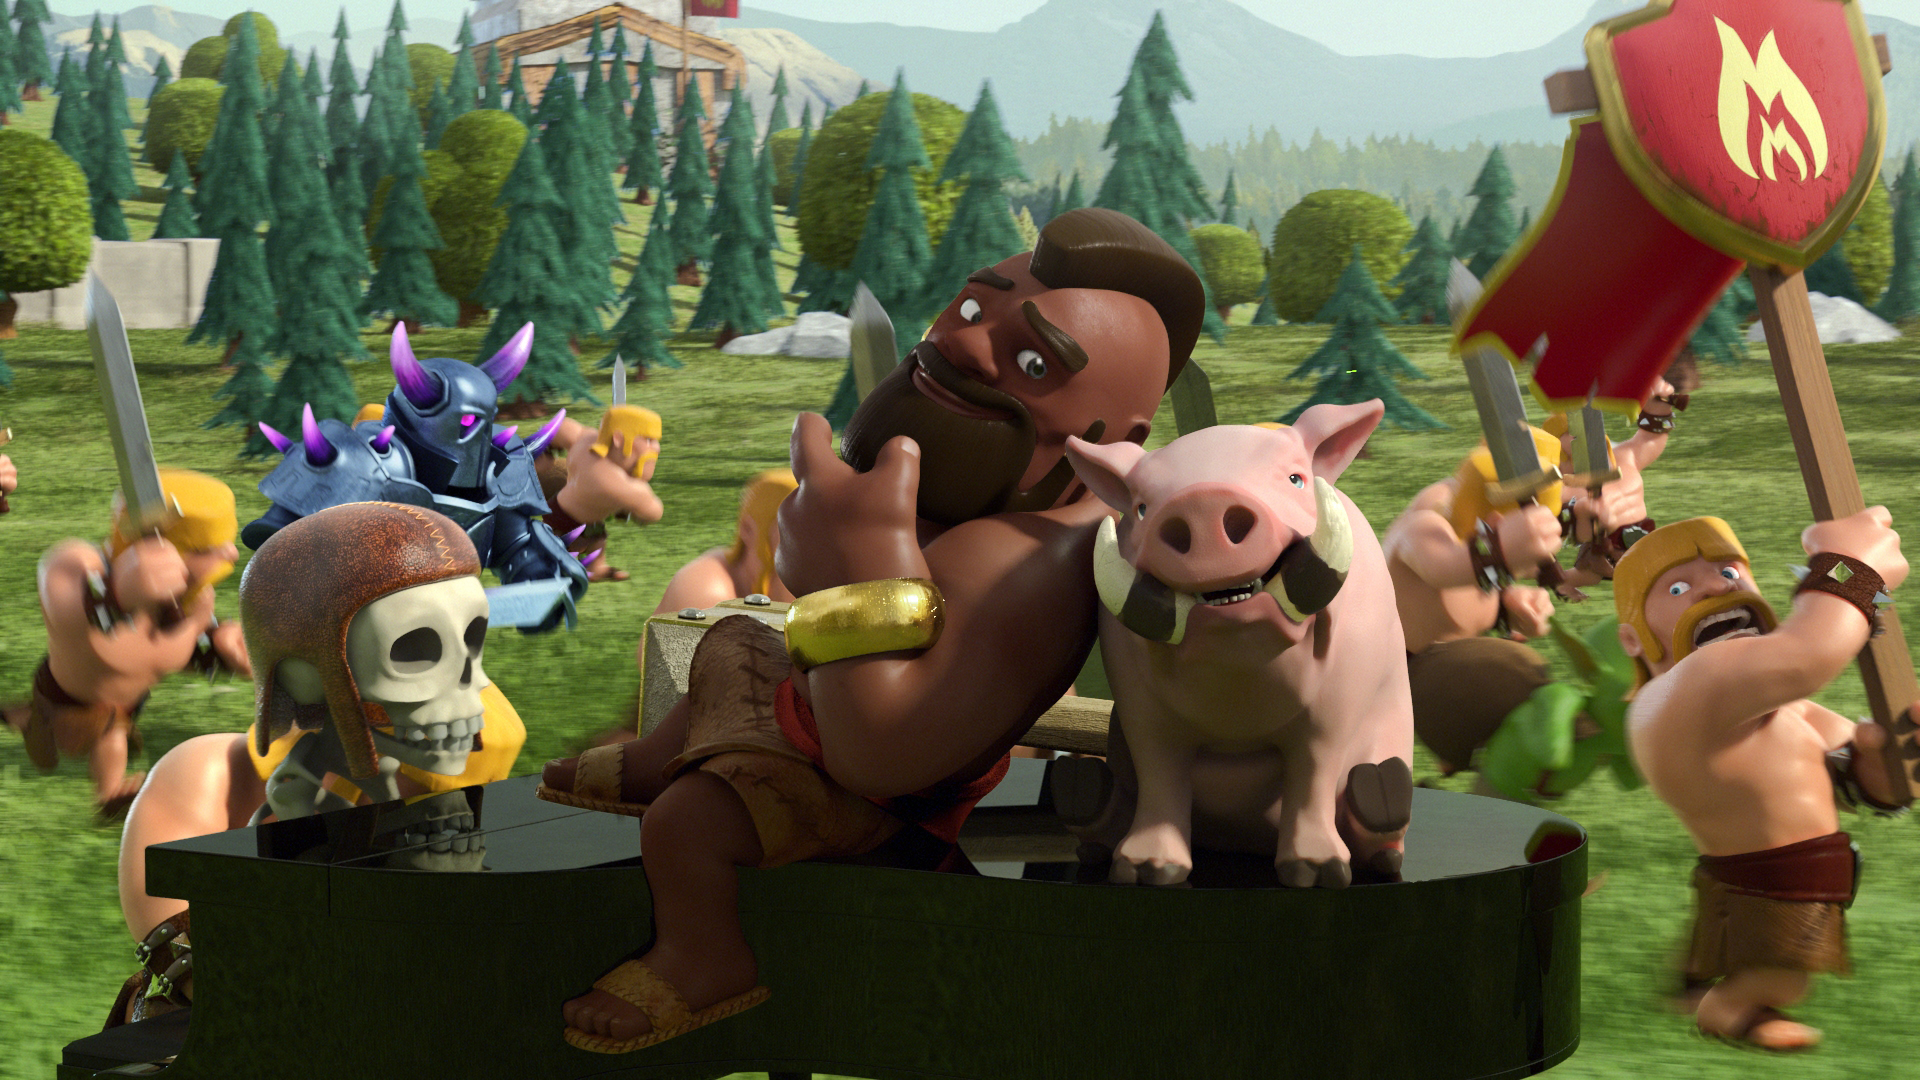 Wallpaper Clash of clans mobile game